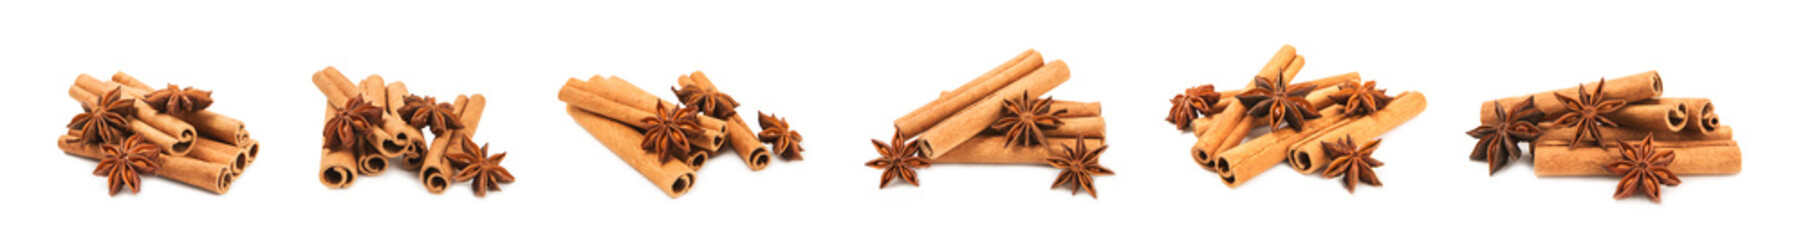 Cinnamon sticks and anise isolated on white background. Cinnamon roll and star anise. Spicy spice...